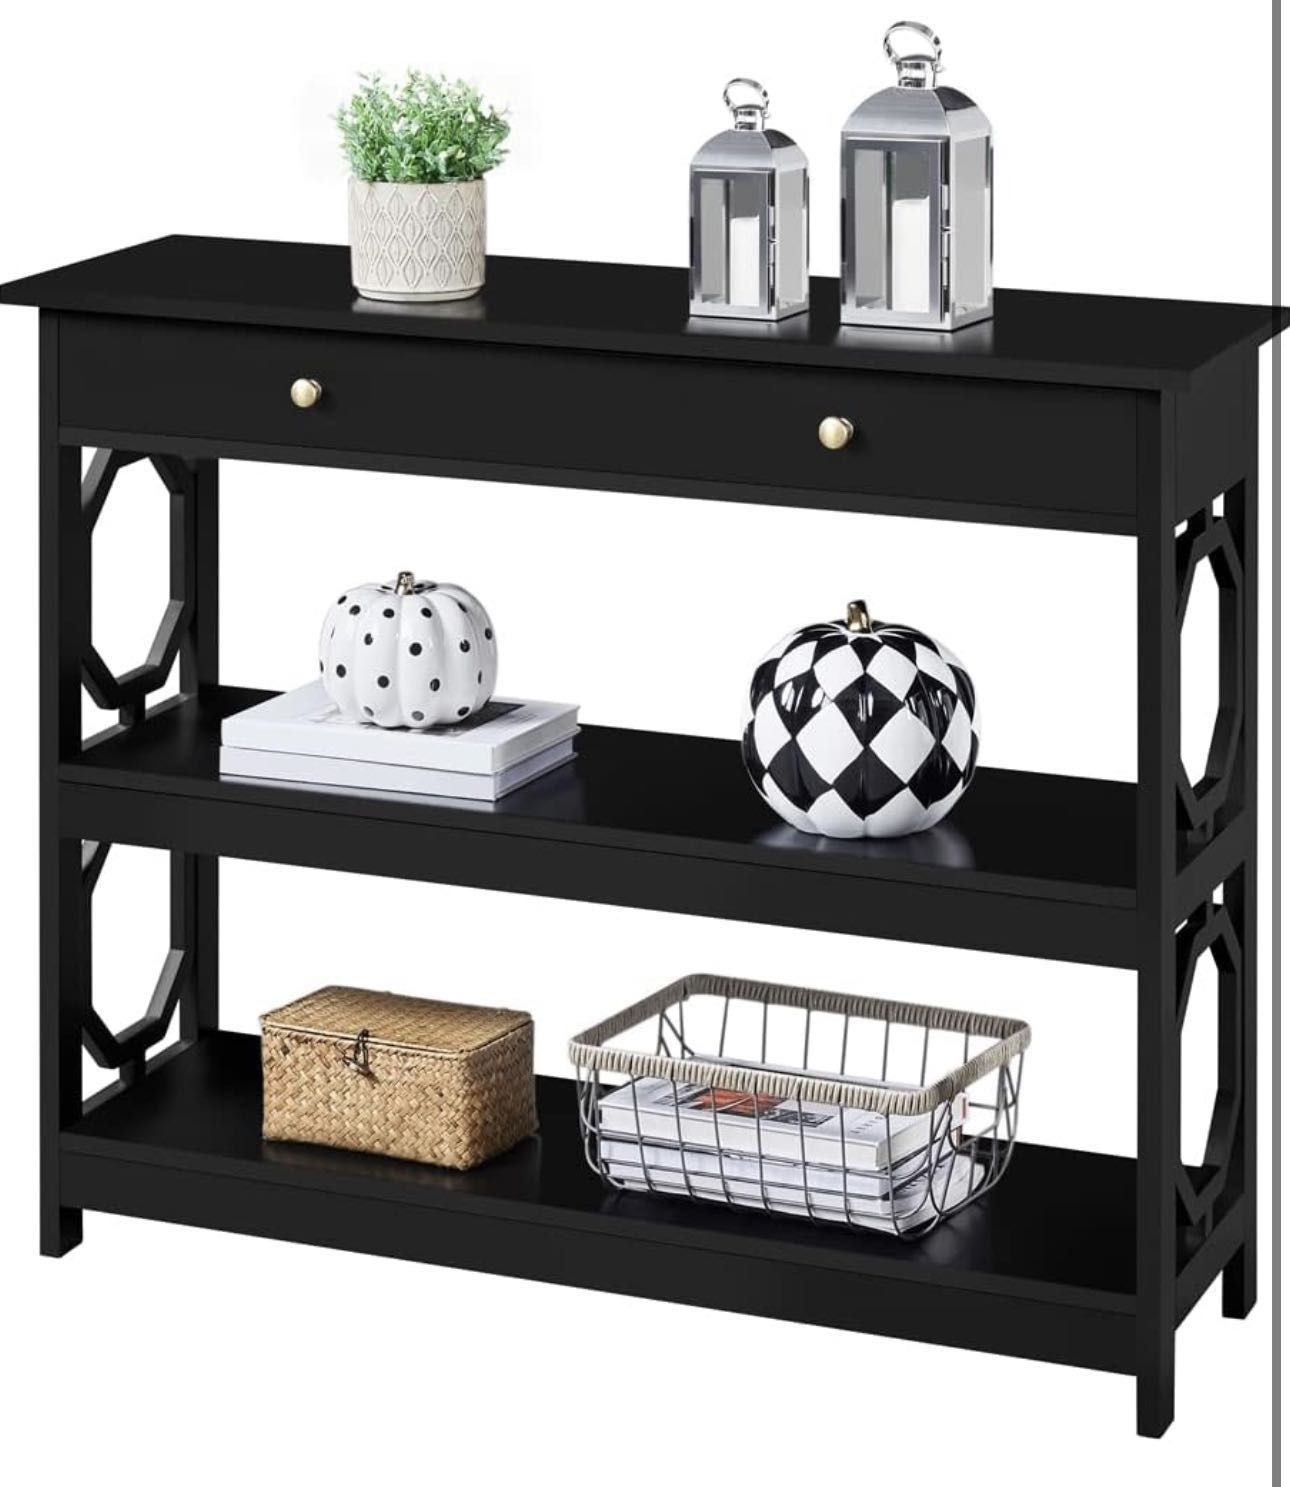 3-Tier Console Table with Drawer and Storage Shelves, 39" Sofa Table Wood Entryway Table for Living Room/Entryway/Hallway/Corridor, Black,Geometric Si